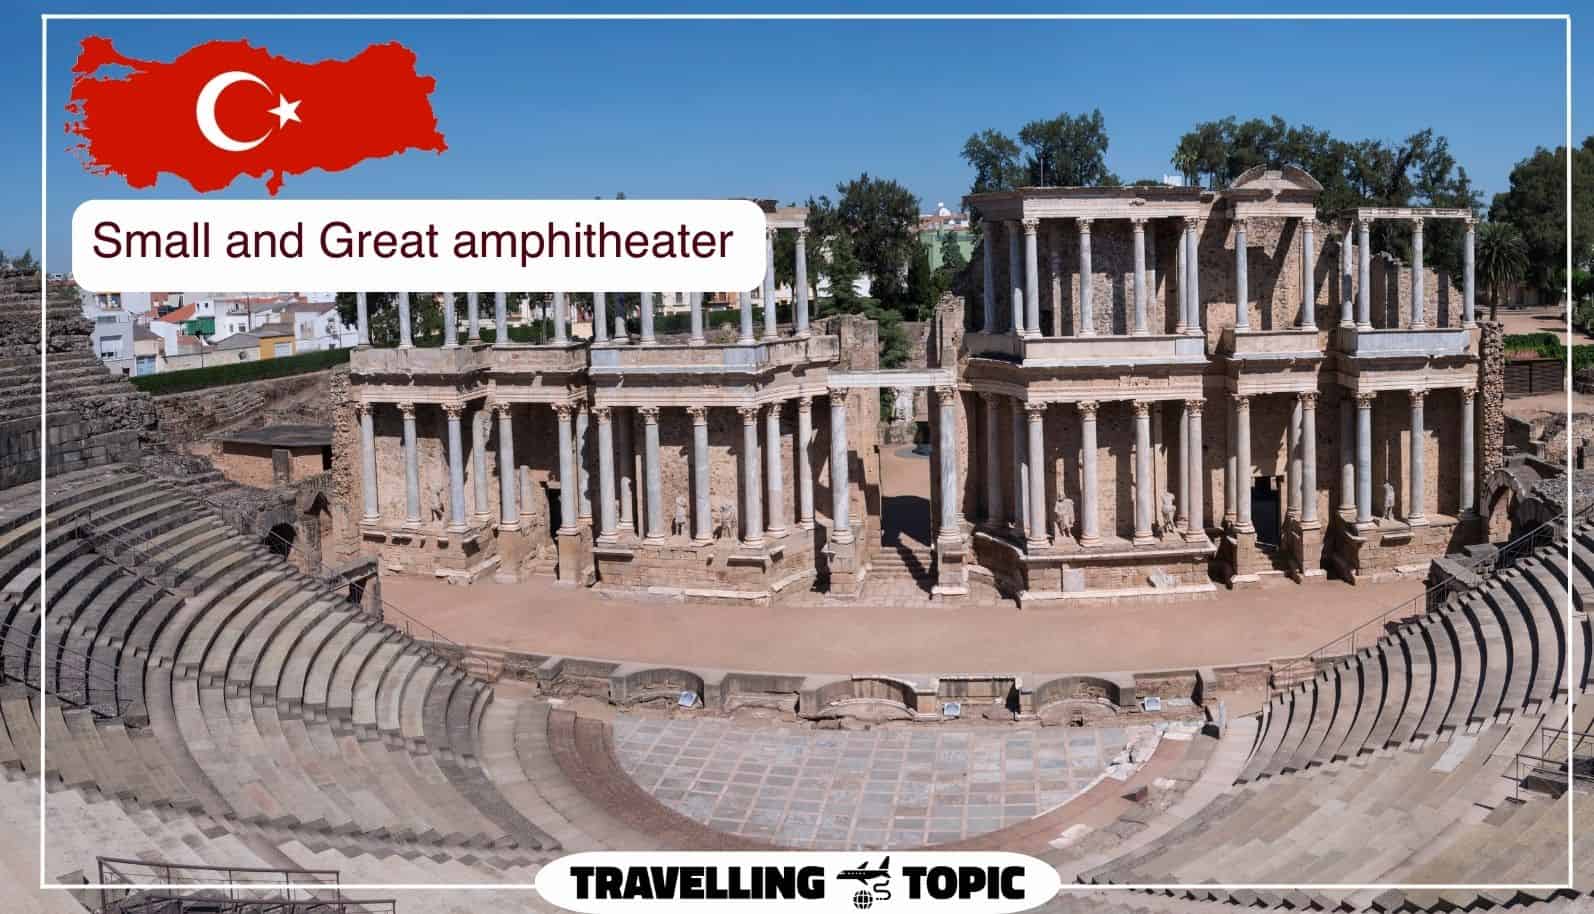 Small and Great amphitheater